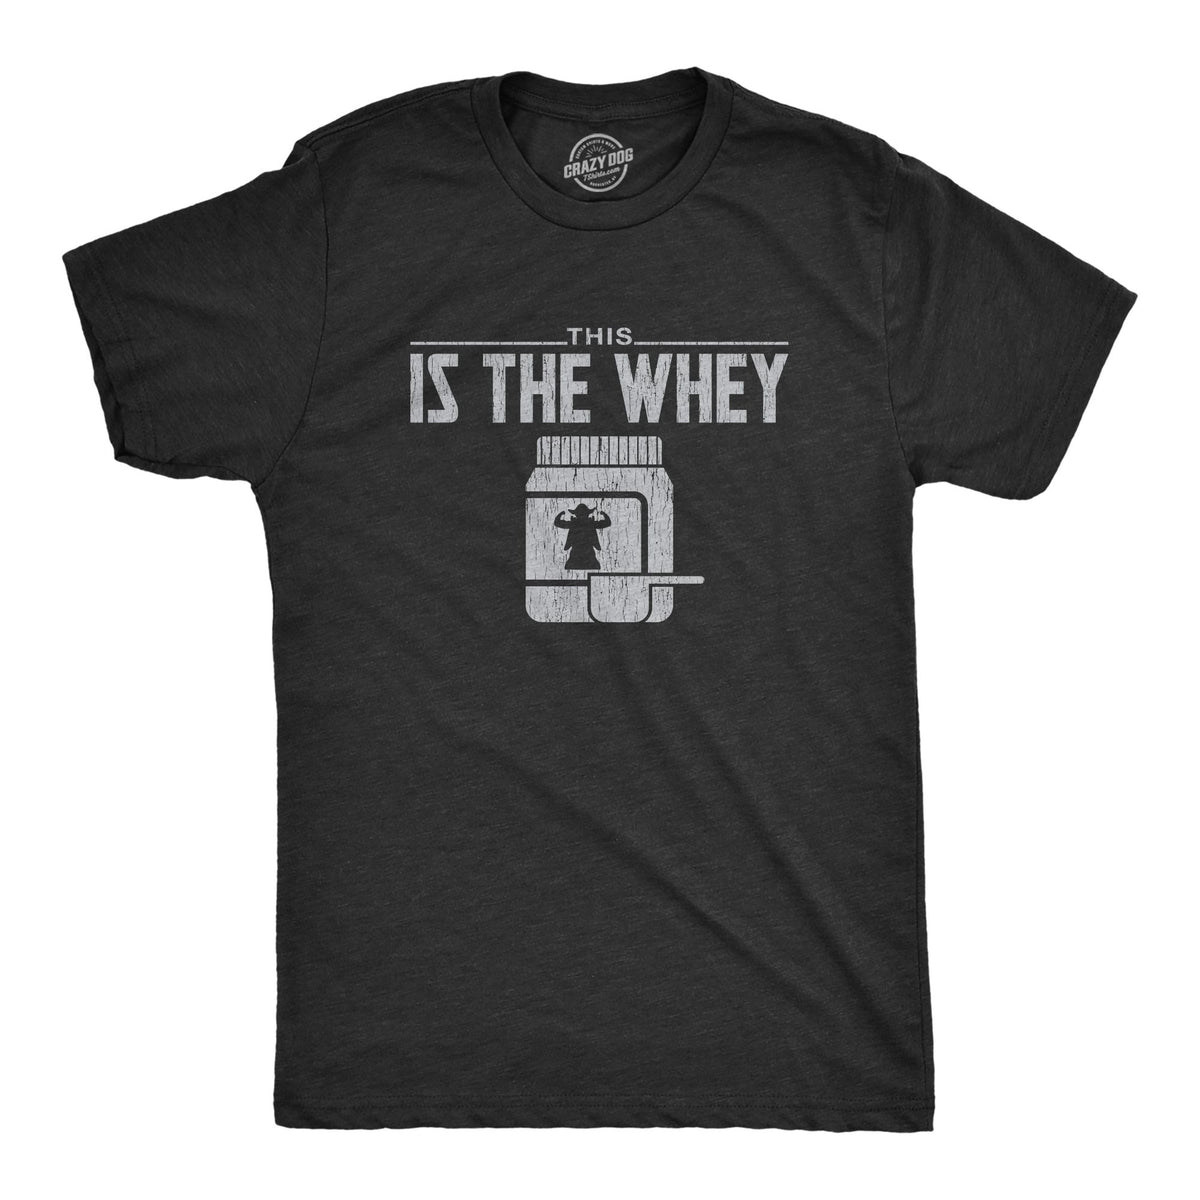 Funny Heather Black This Is The Whey Mens T Shirt Nerdy Fitness TV &amp; Movies Tee